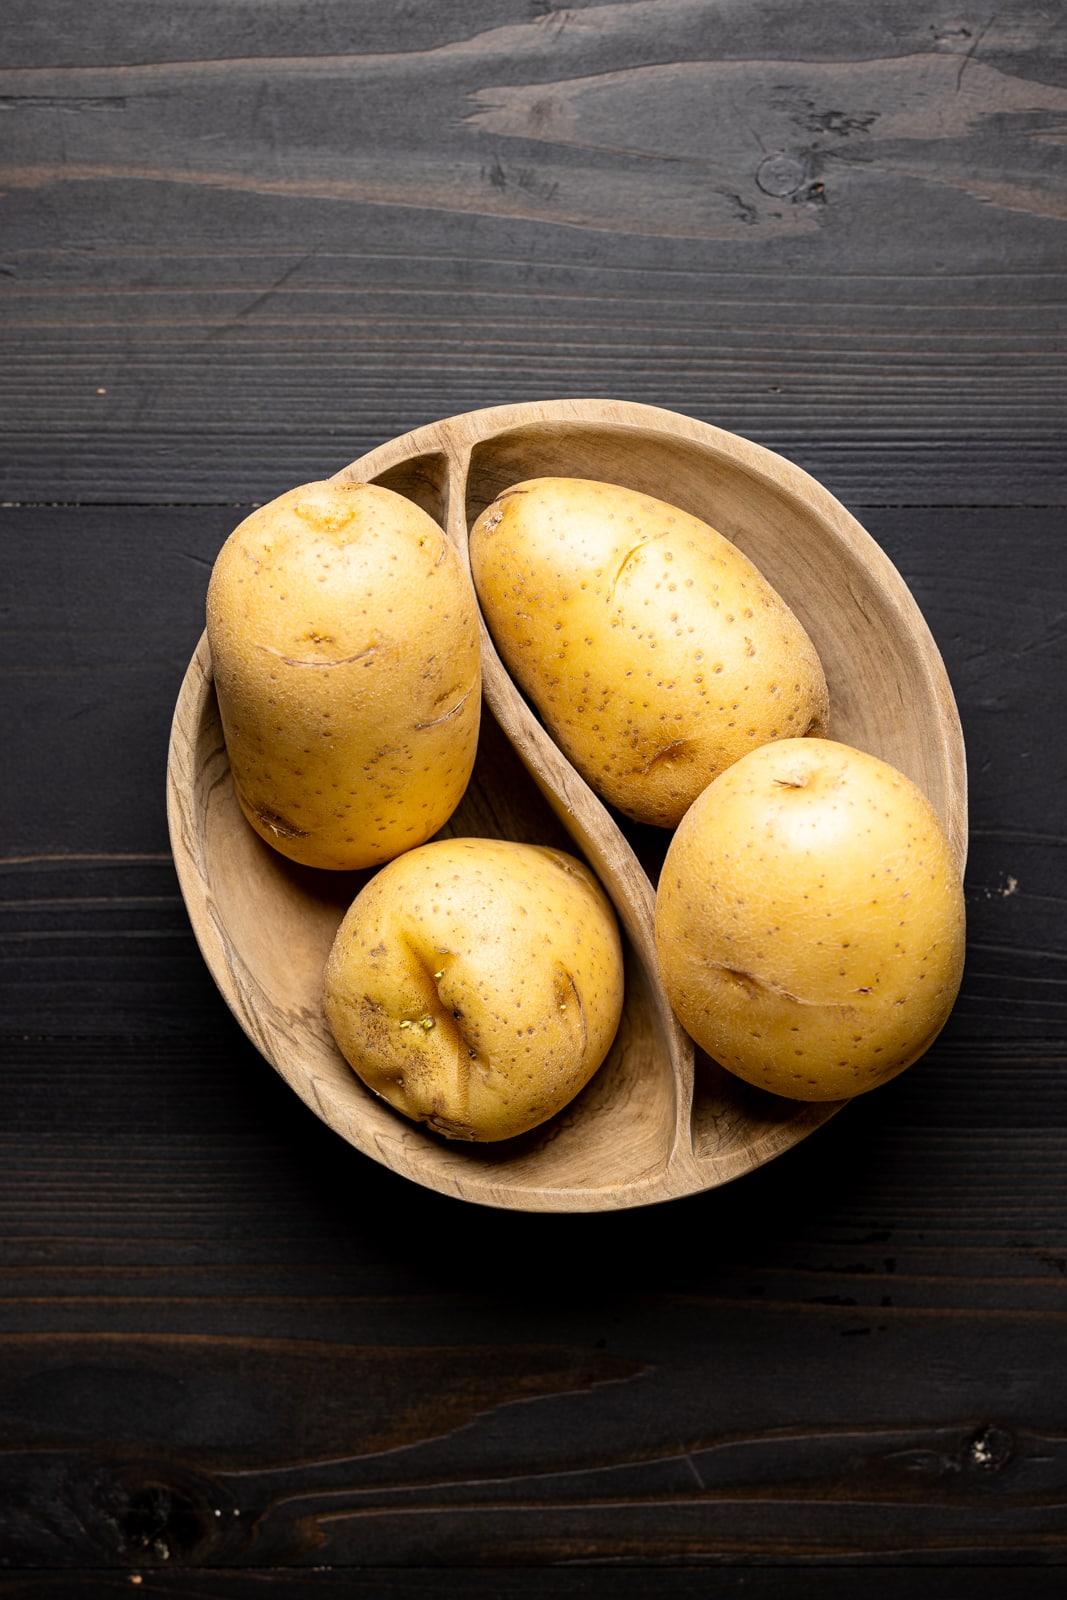 Potatoes in a wood bowl on a black table.